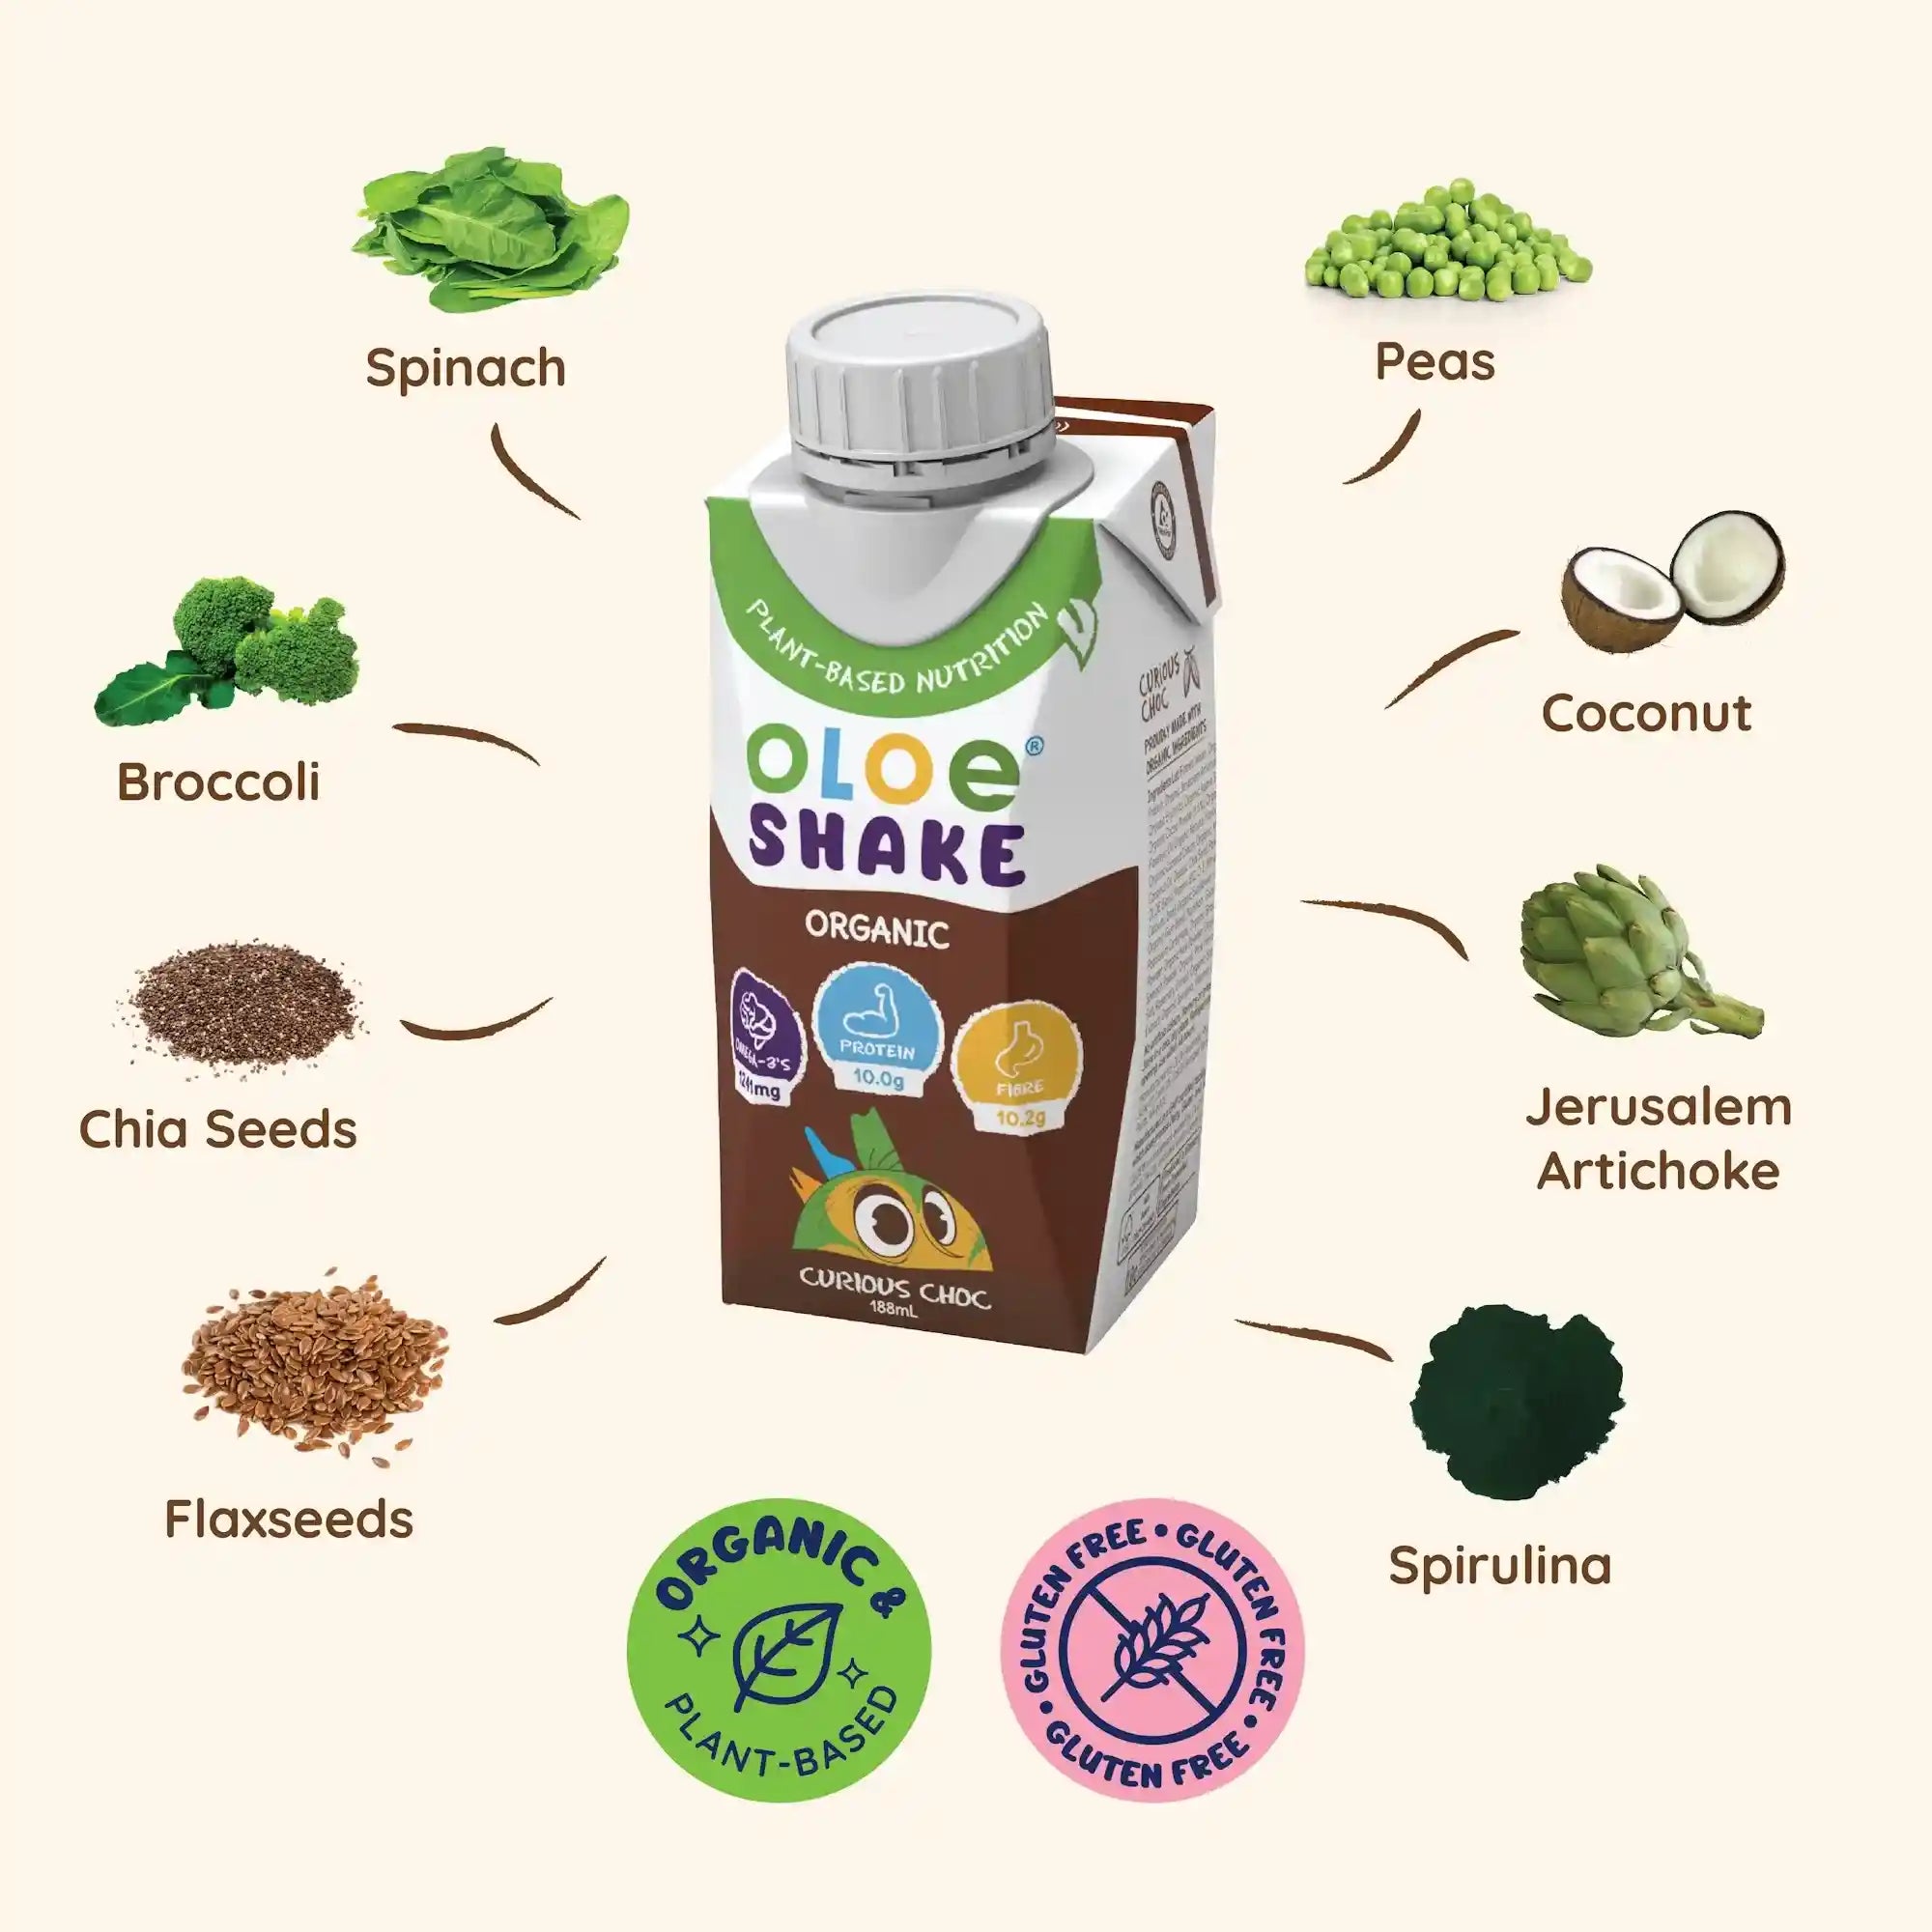 oloe-shake-curious-choc-organic-plant-based-ingredients-around-front-facing-package